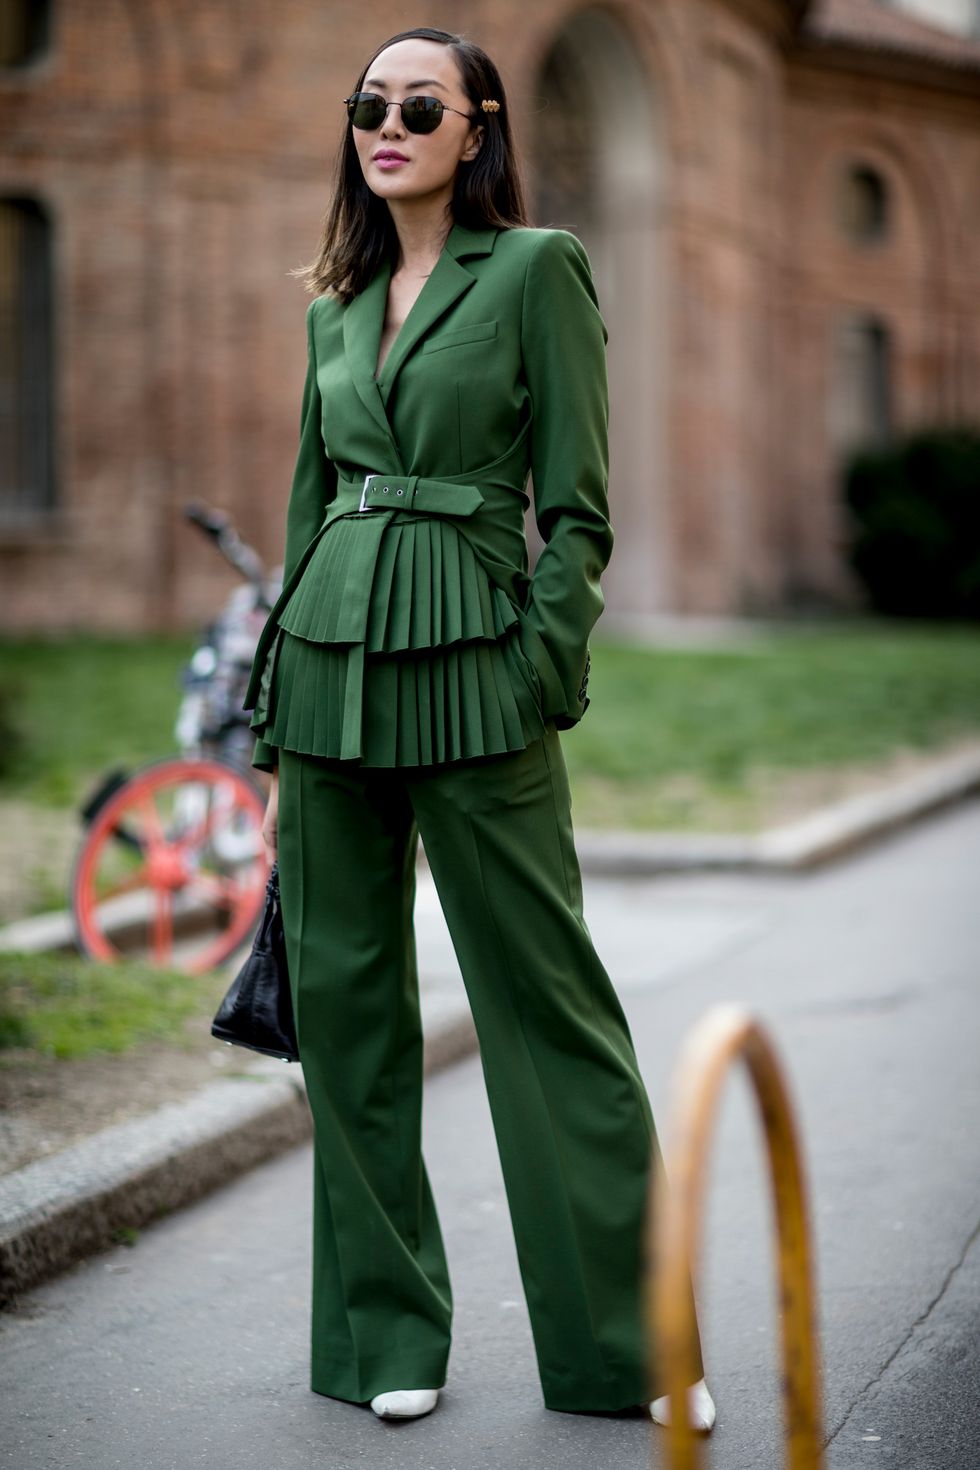 Clothing, Green, Street fashion, Fashion model, Fashion, Pantsuit, Outerwear, Suit, Waist, Trench coat, 